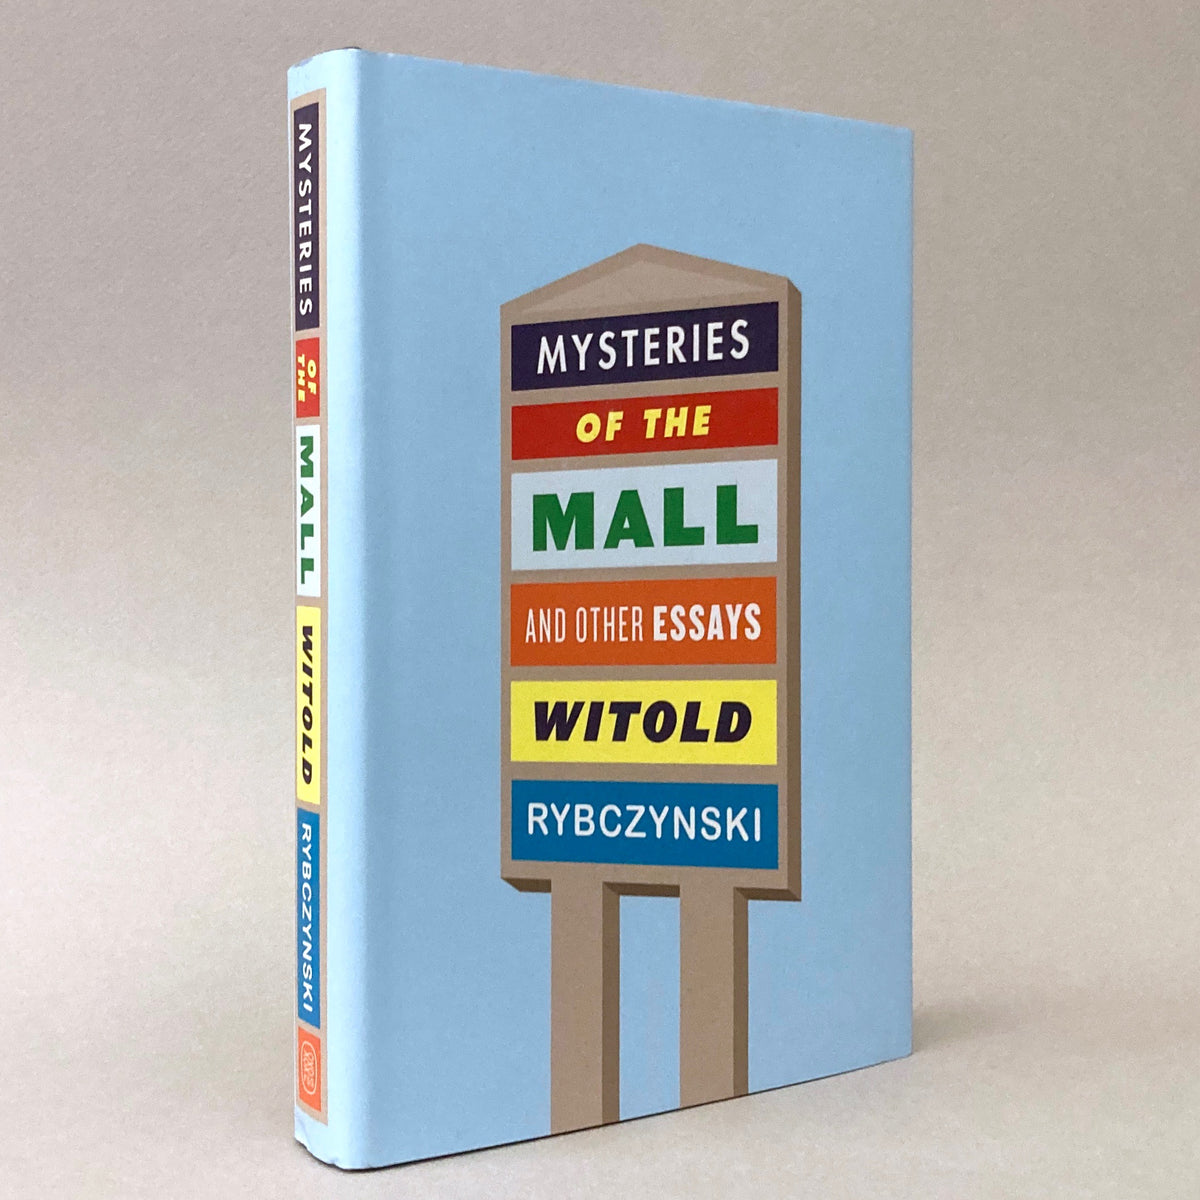 Mysteries of the Mall and Other Essays